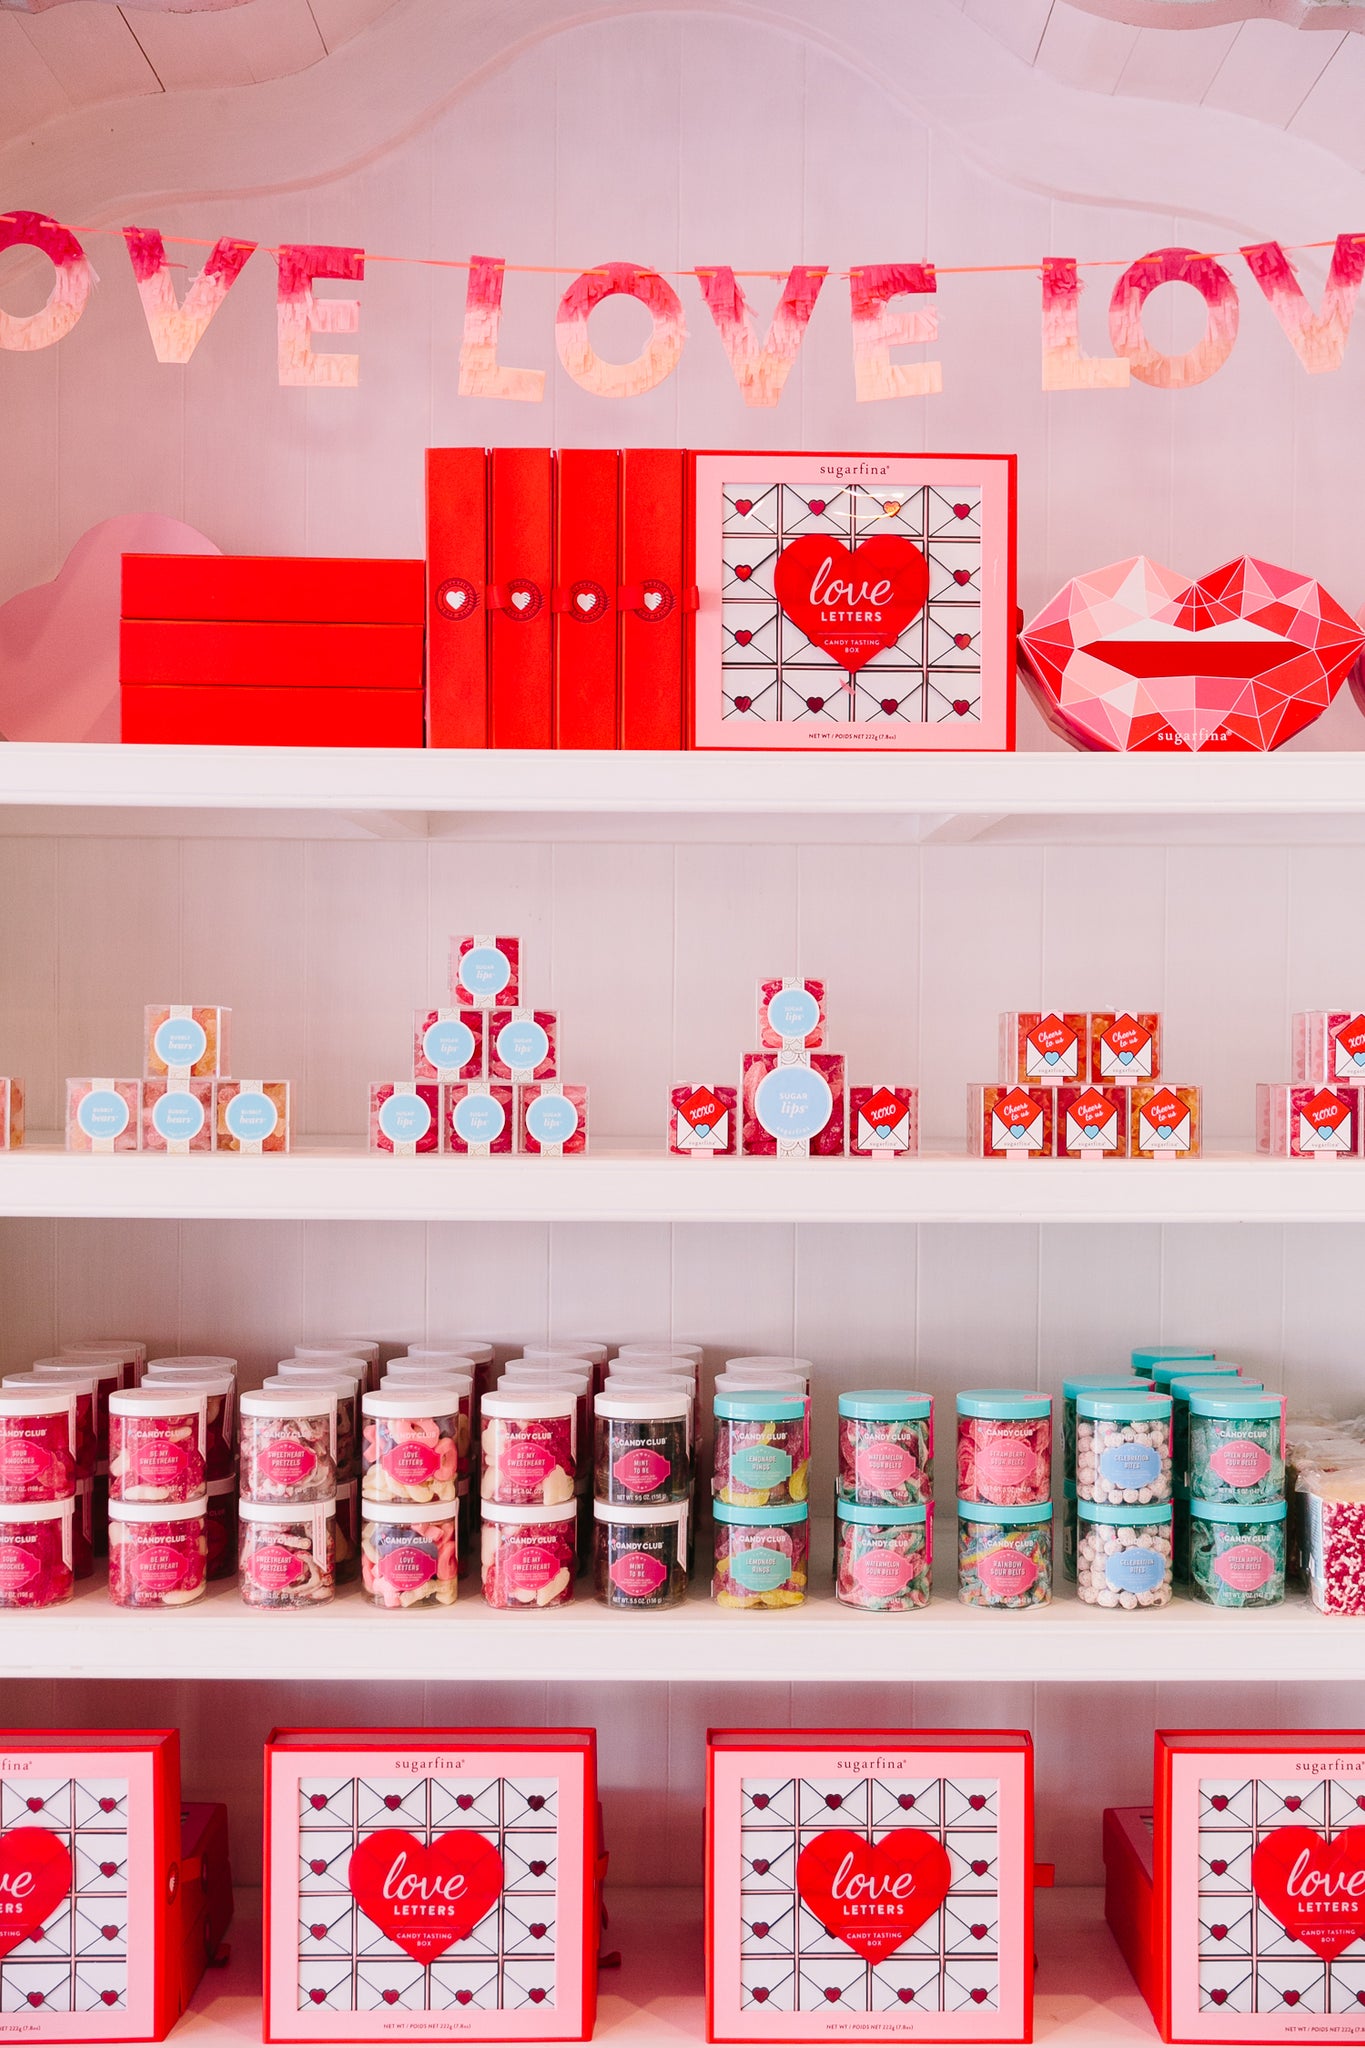 Selection of Valentine's Day candy at Bonjour Fête